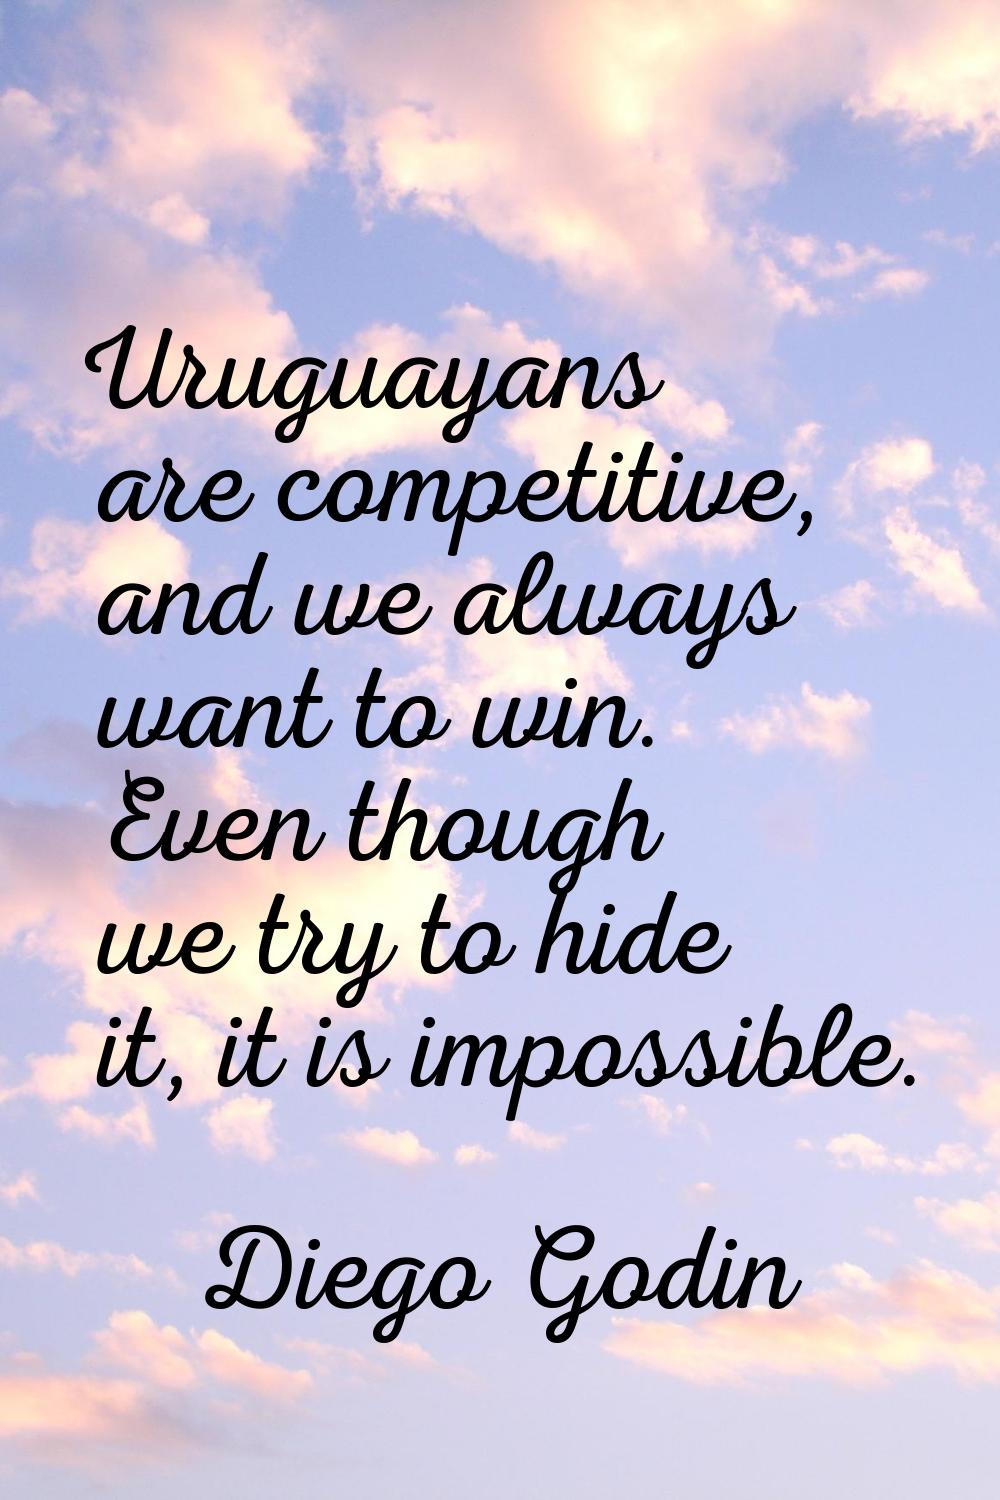 Uruguayans are competitive, and we always want to win. Even though we try to hide it, it is impossi